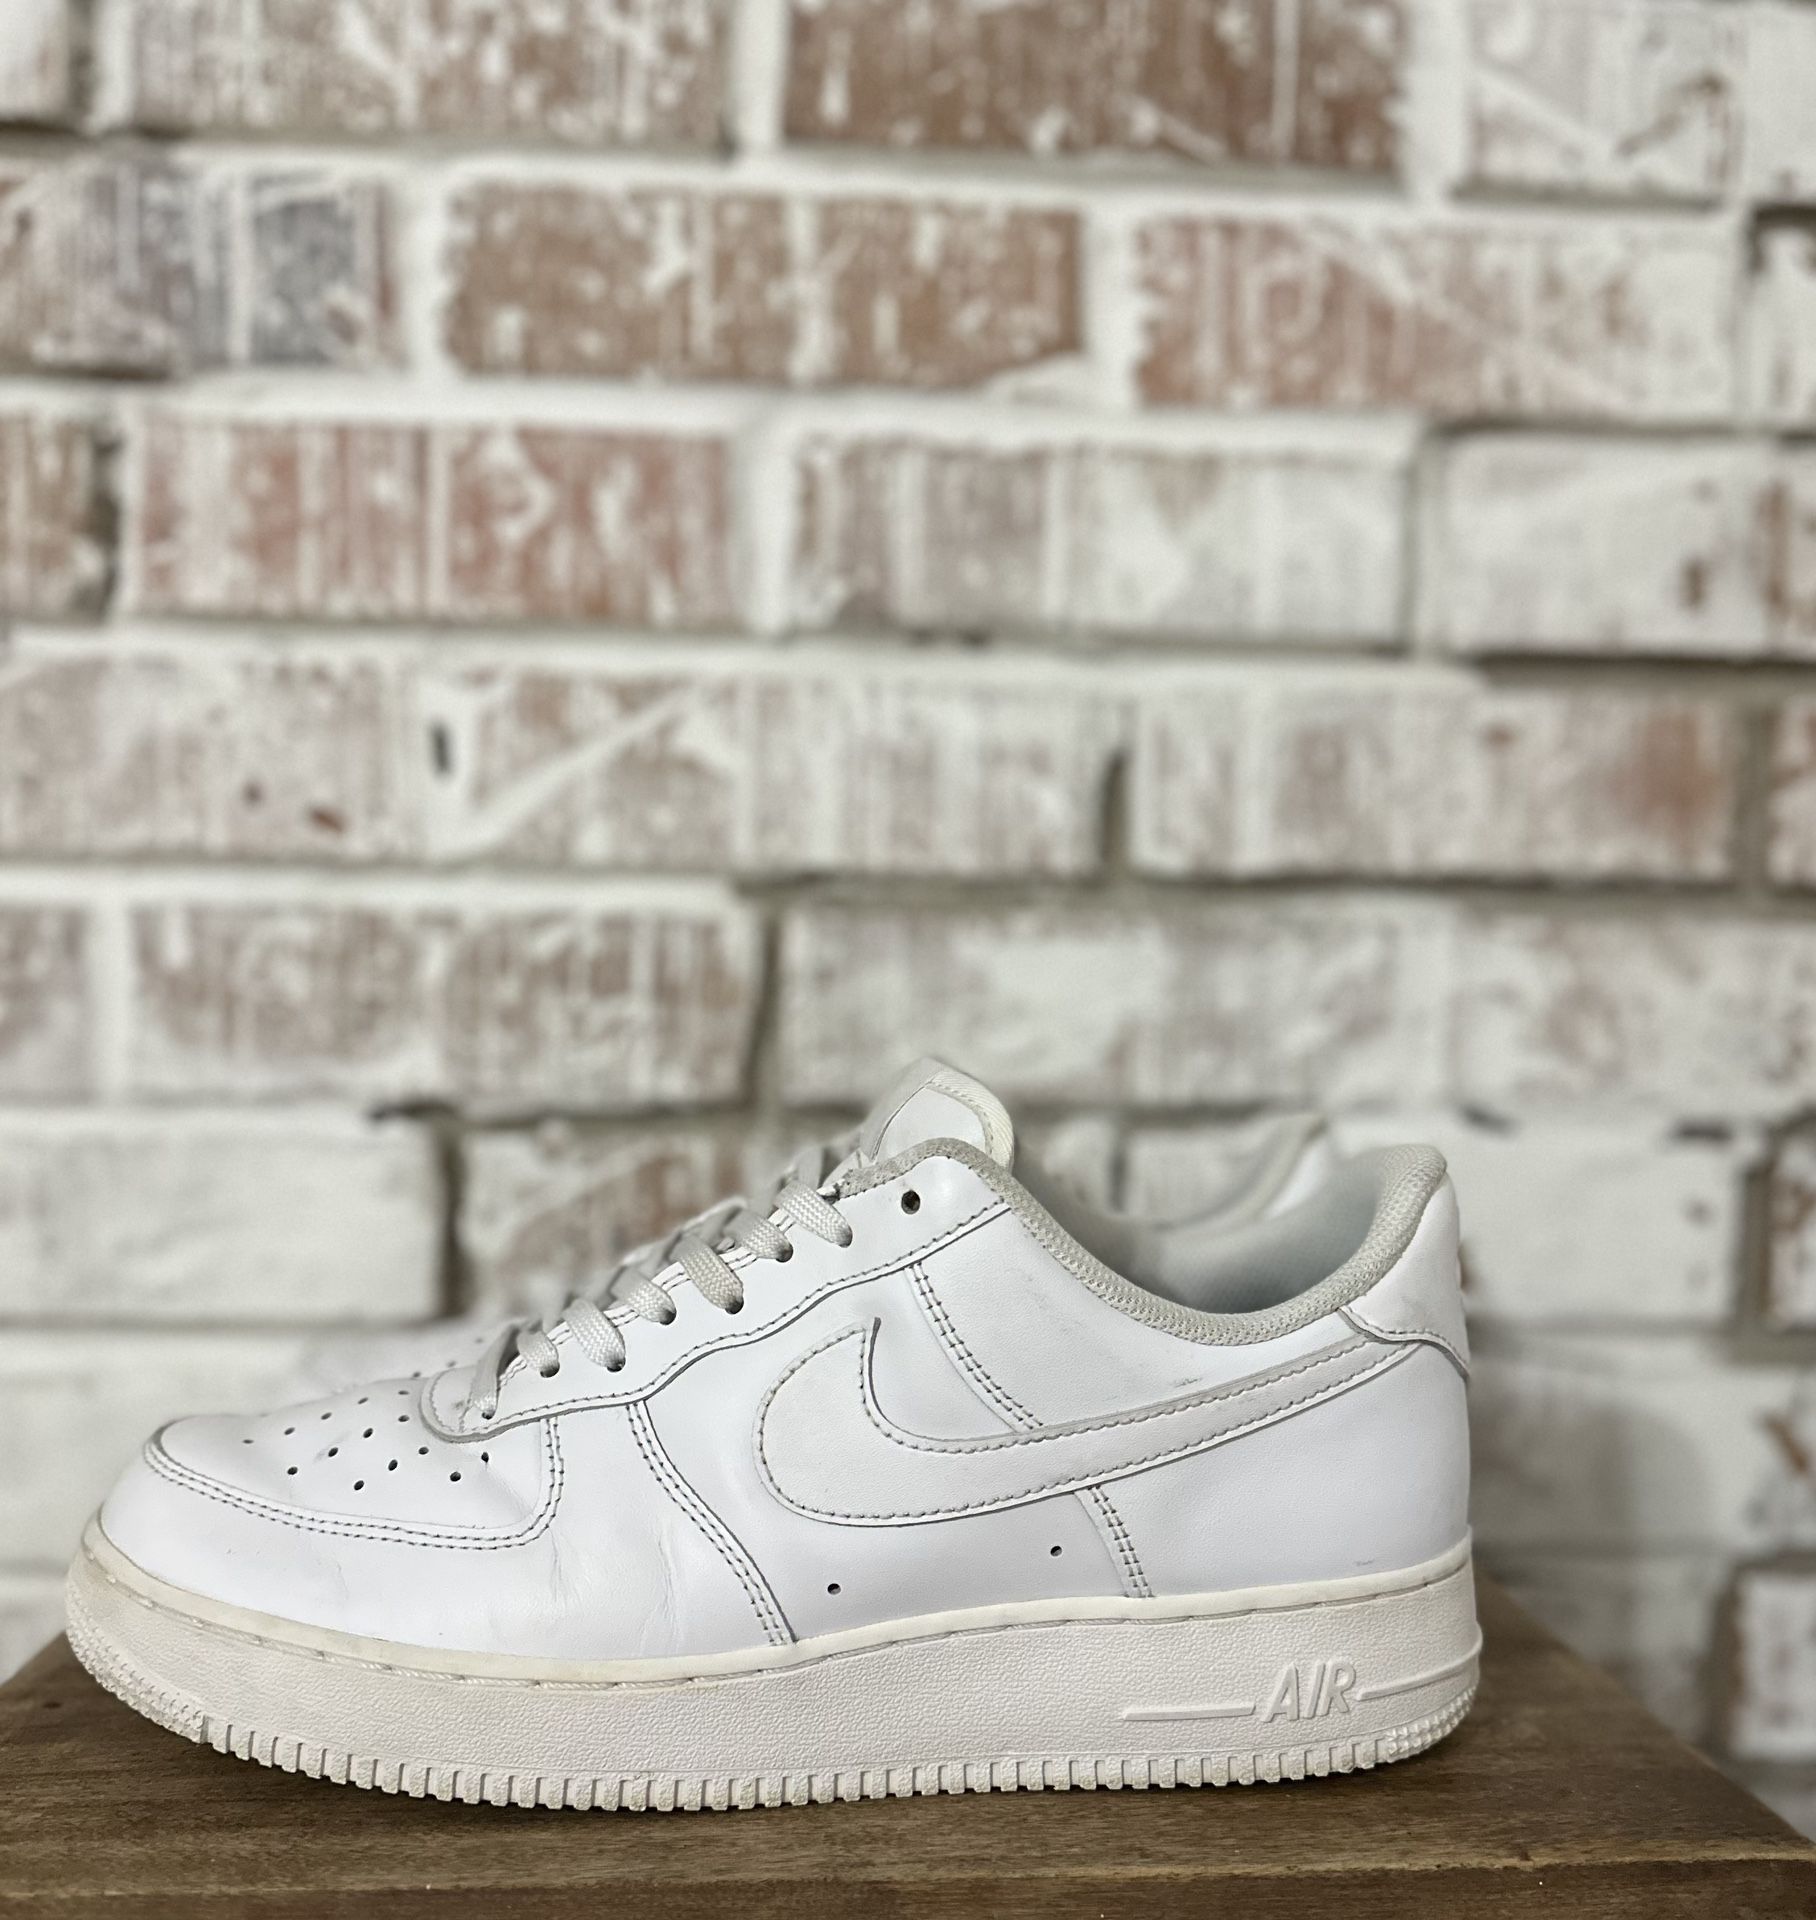 Nike Air Force 1 One Low Top Sneakers Triple White Leather Mens Size 9.5